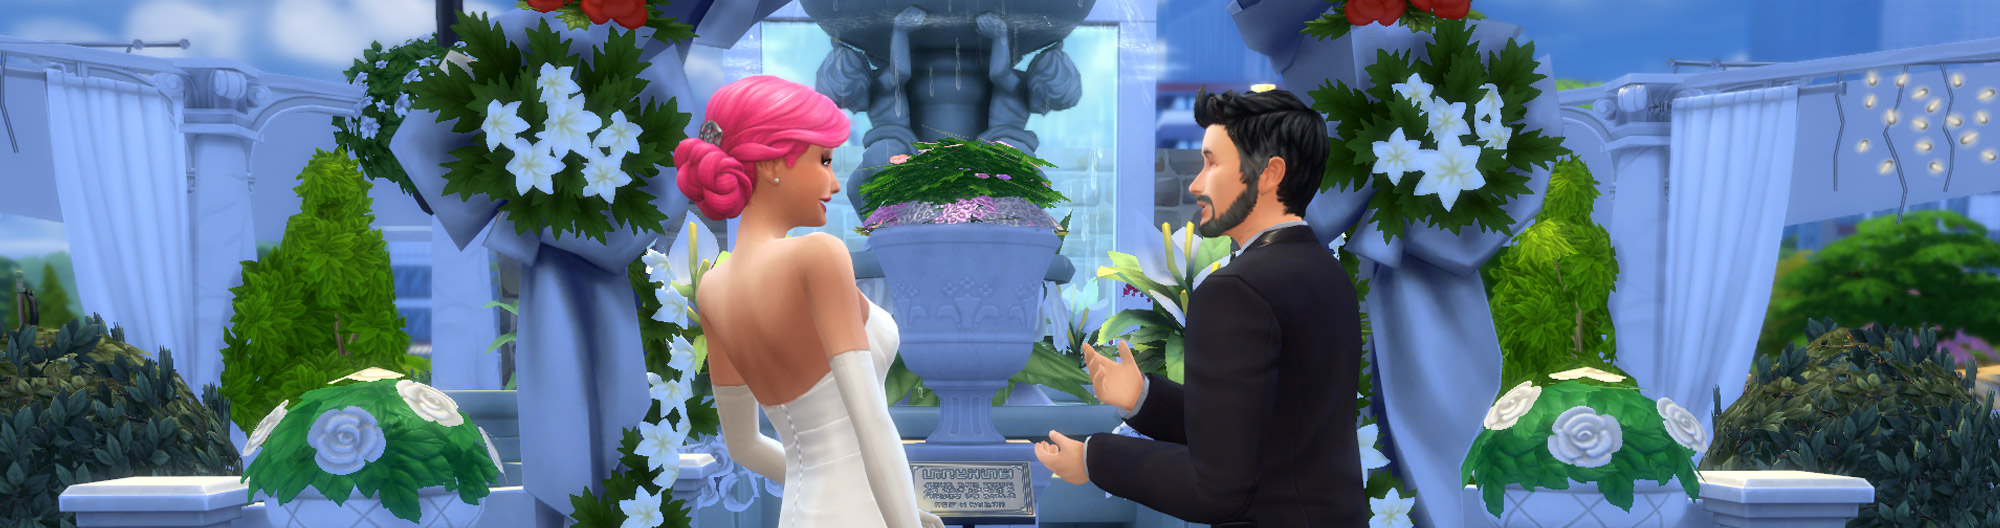 How to plan a Wedding in The Sims 4 - Sims Online - 2000 x 528 jpeg 287kB